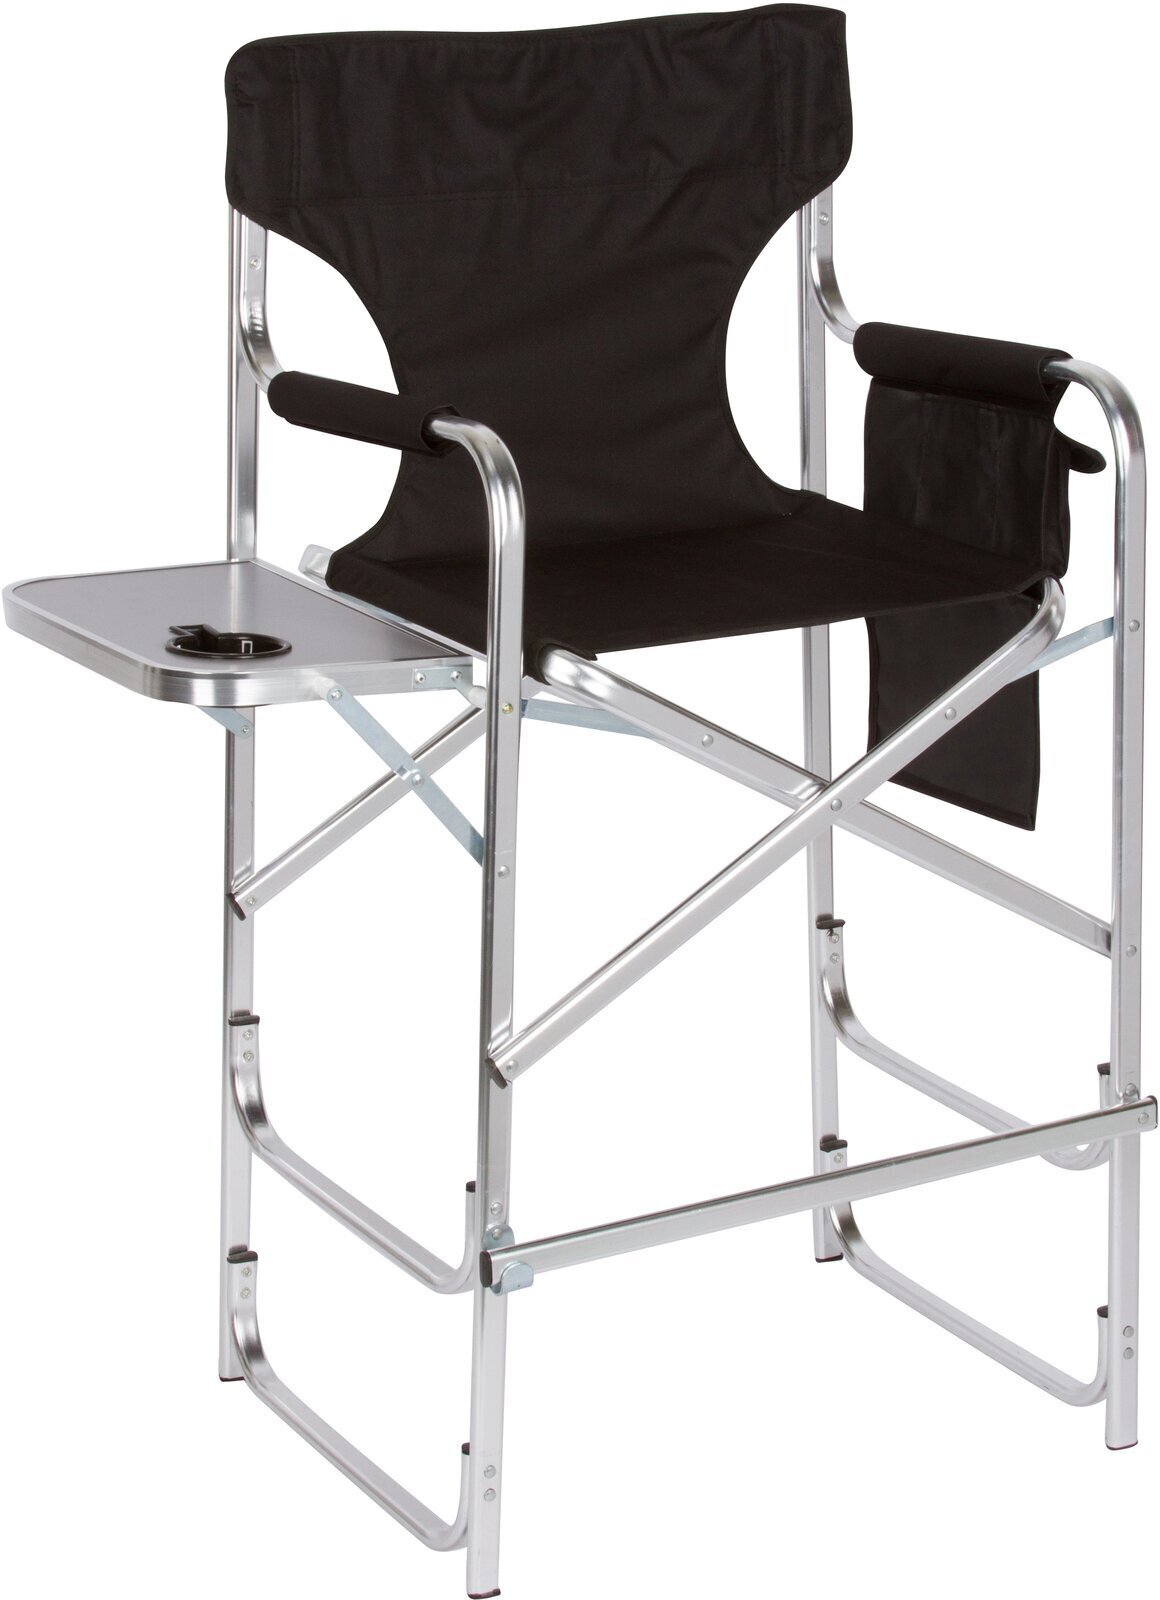 ALUMINIUM LIGHTWEIGHT GREEN FOLDING DIRECTORS CHAIR WITH ARMS FOR GARDEN CAMPING 